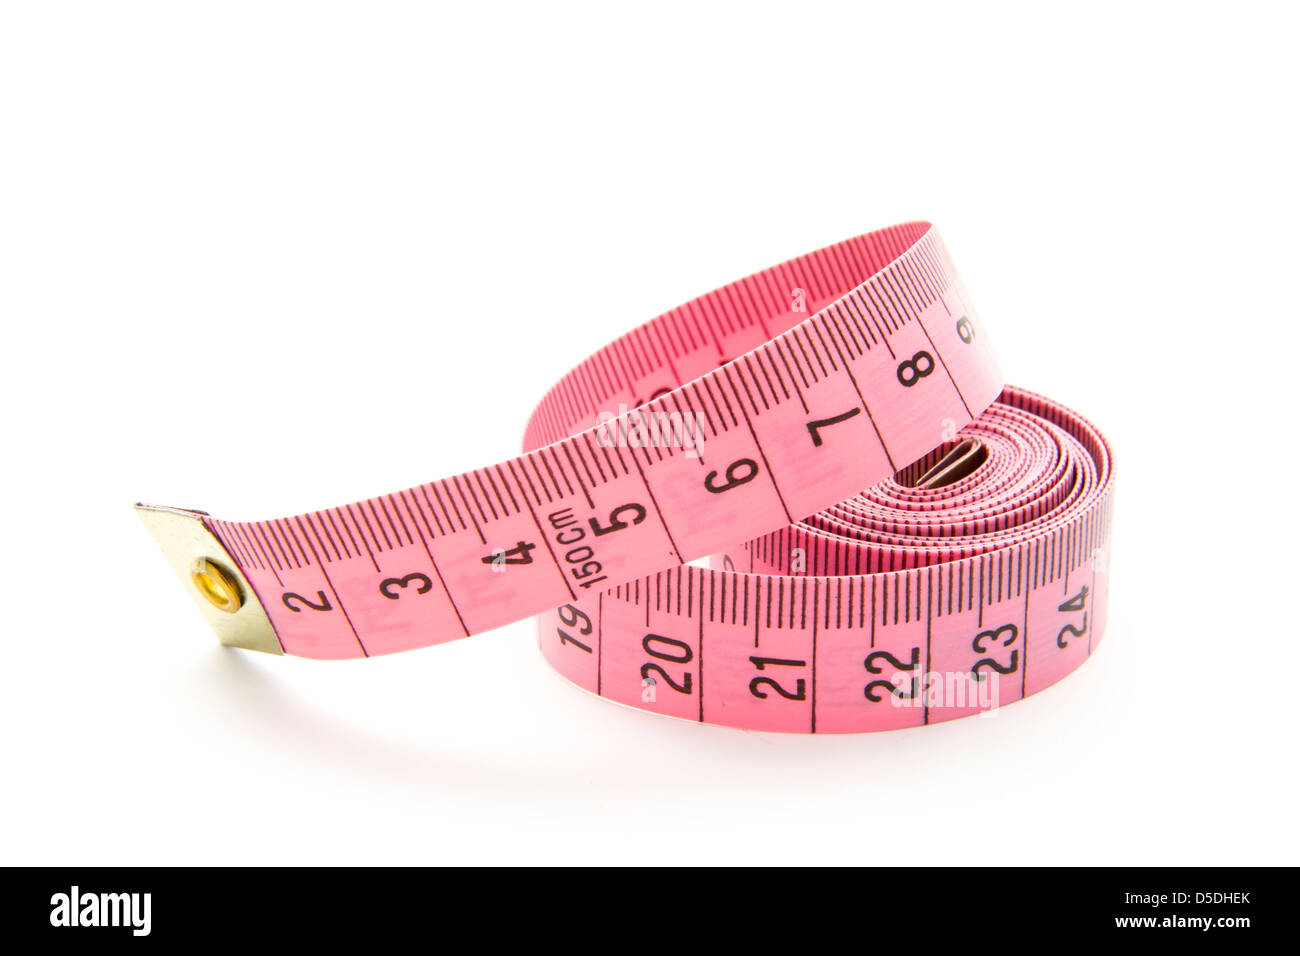 https://c8.alamy.com/comp/D5DHEK/pink-measuring-tape-isolated-on-white-background-D5DHEK.jpg